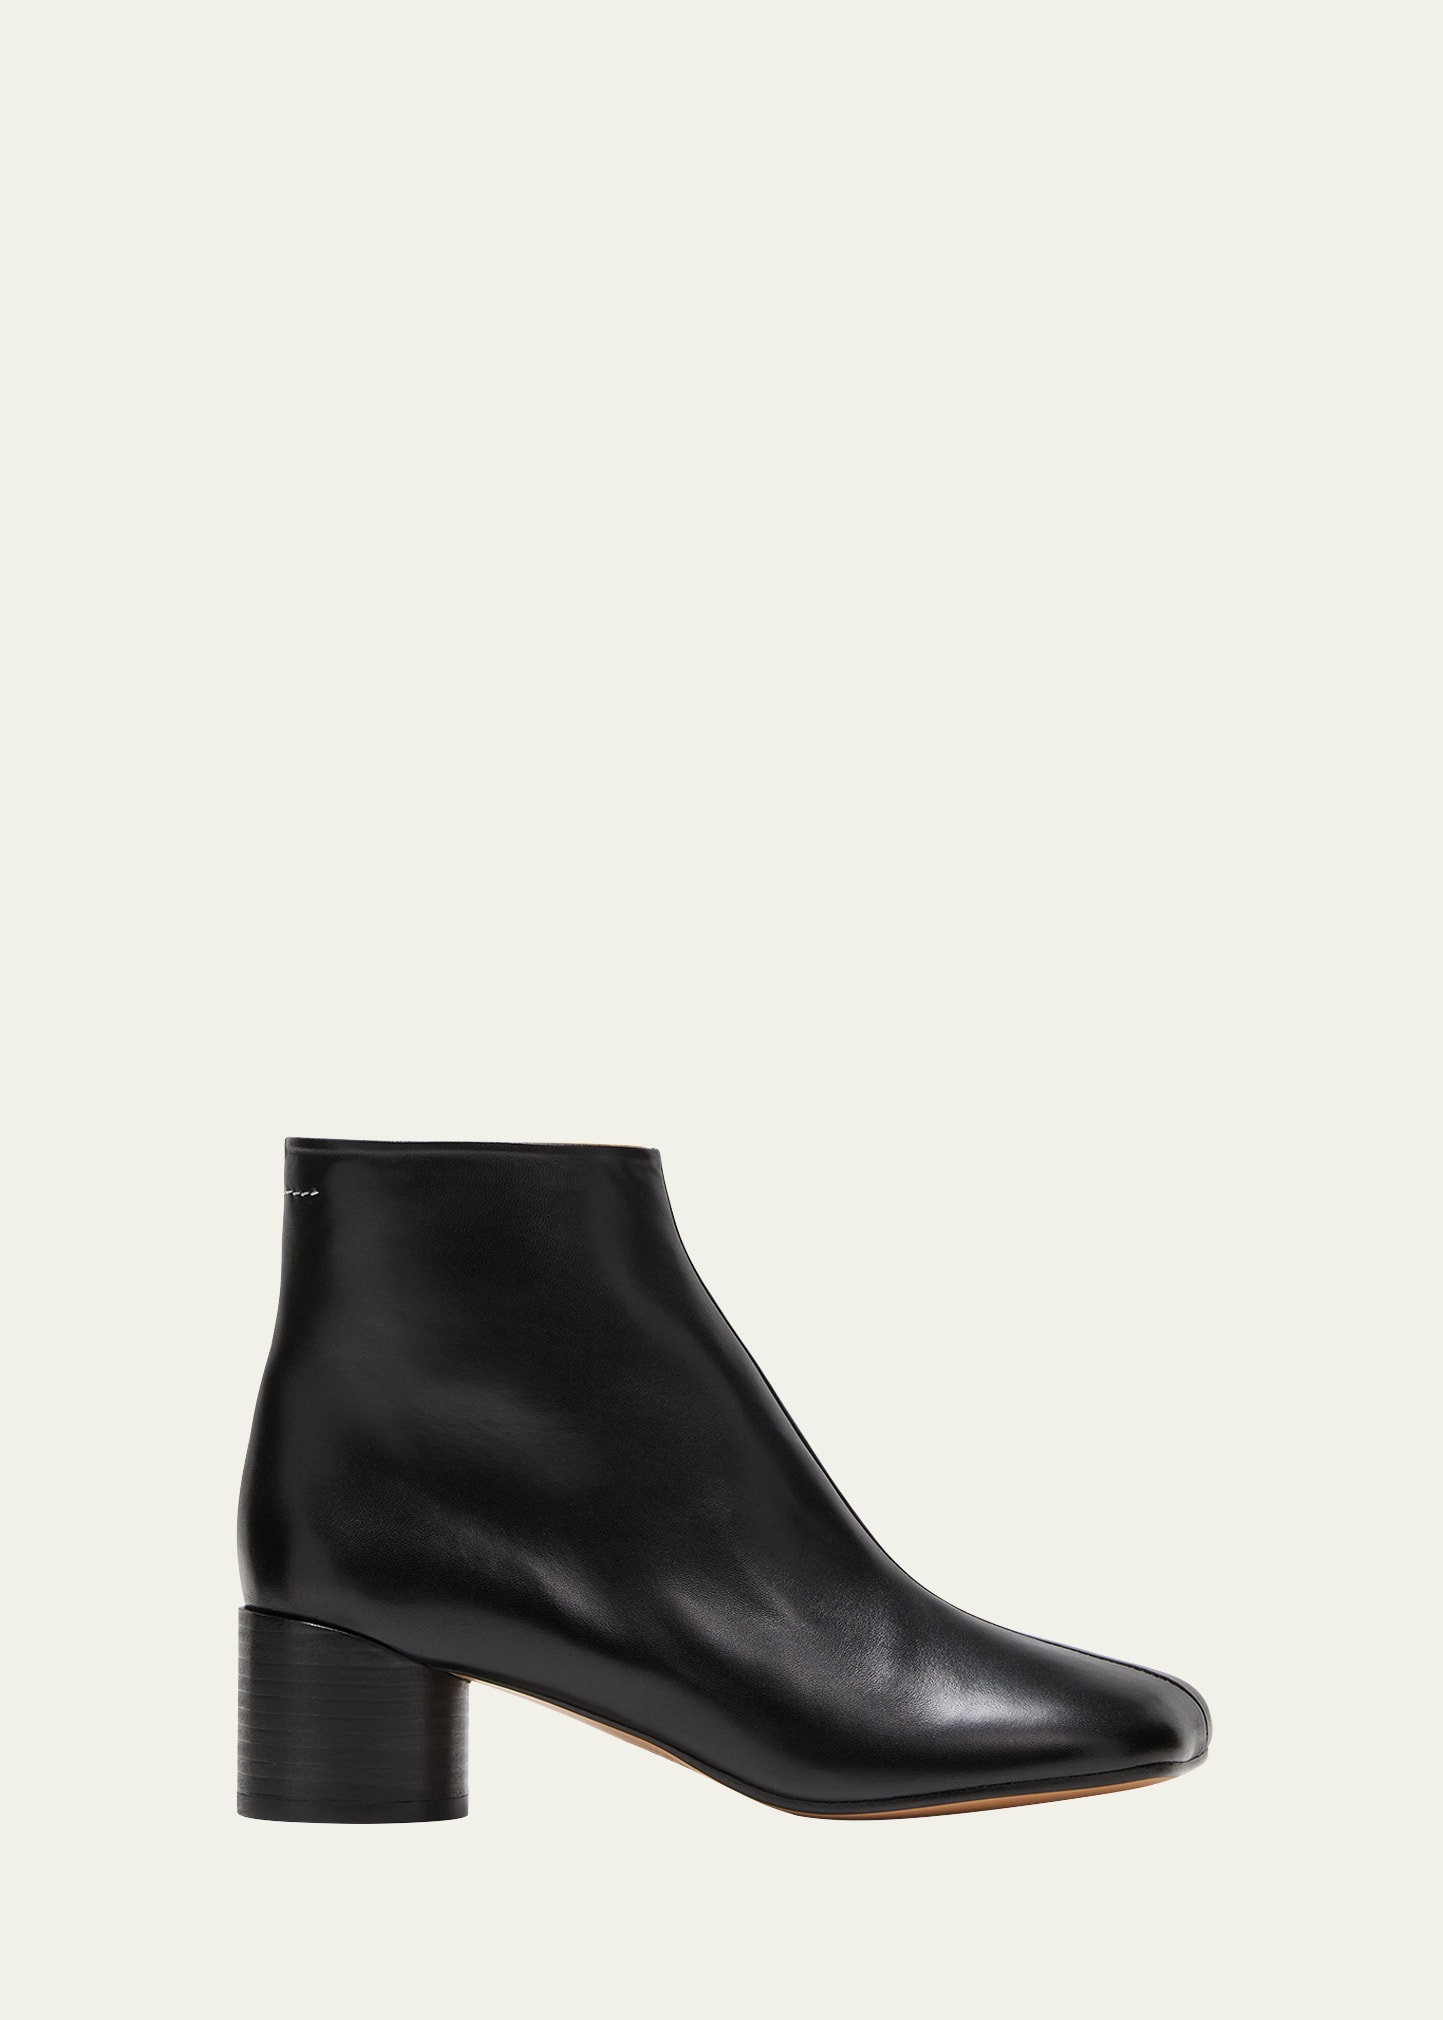 Anatomic Leather Zip Ankle Boots